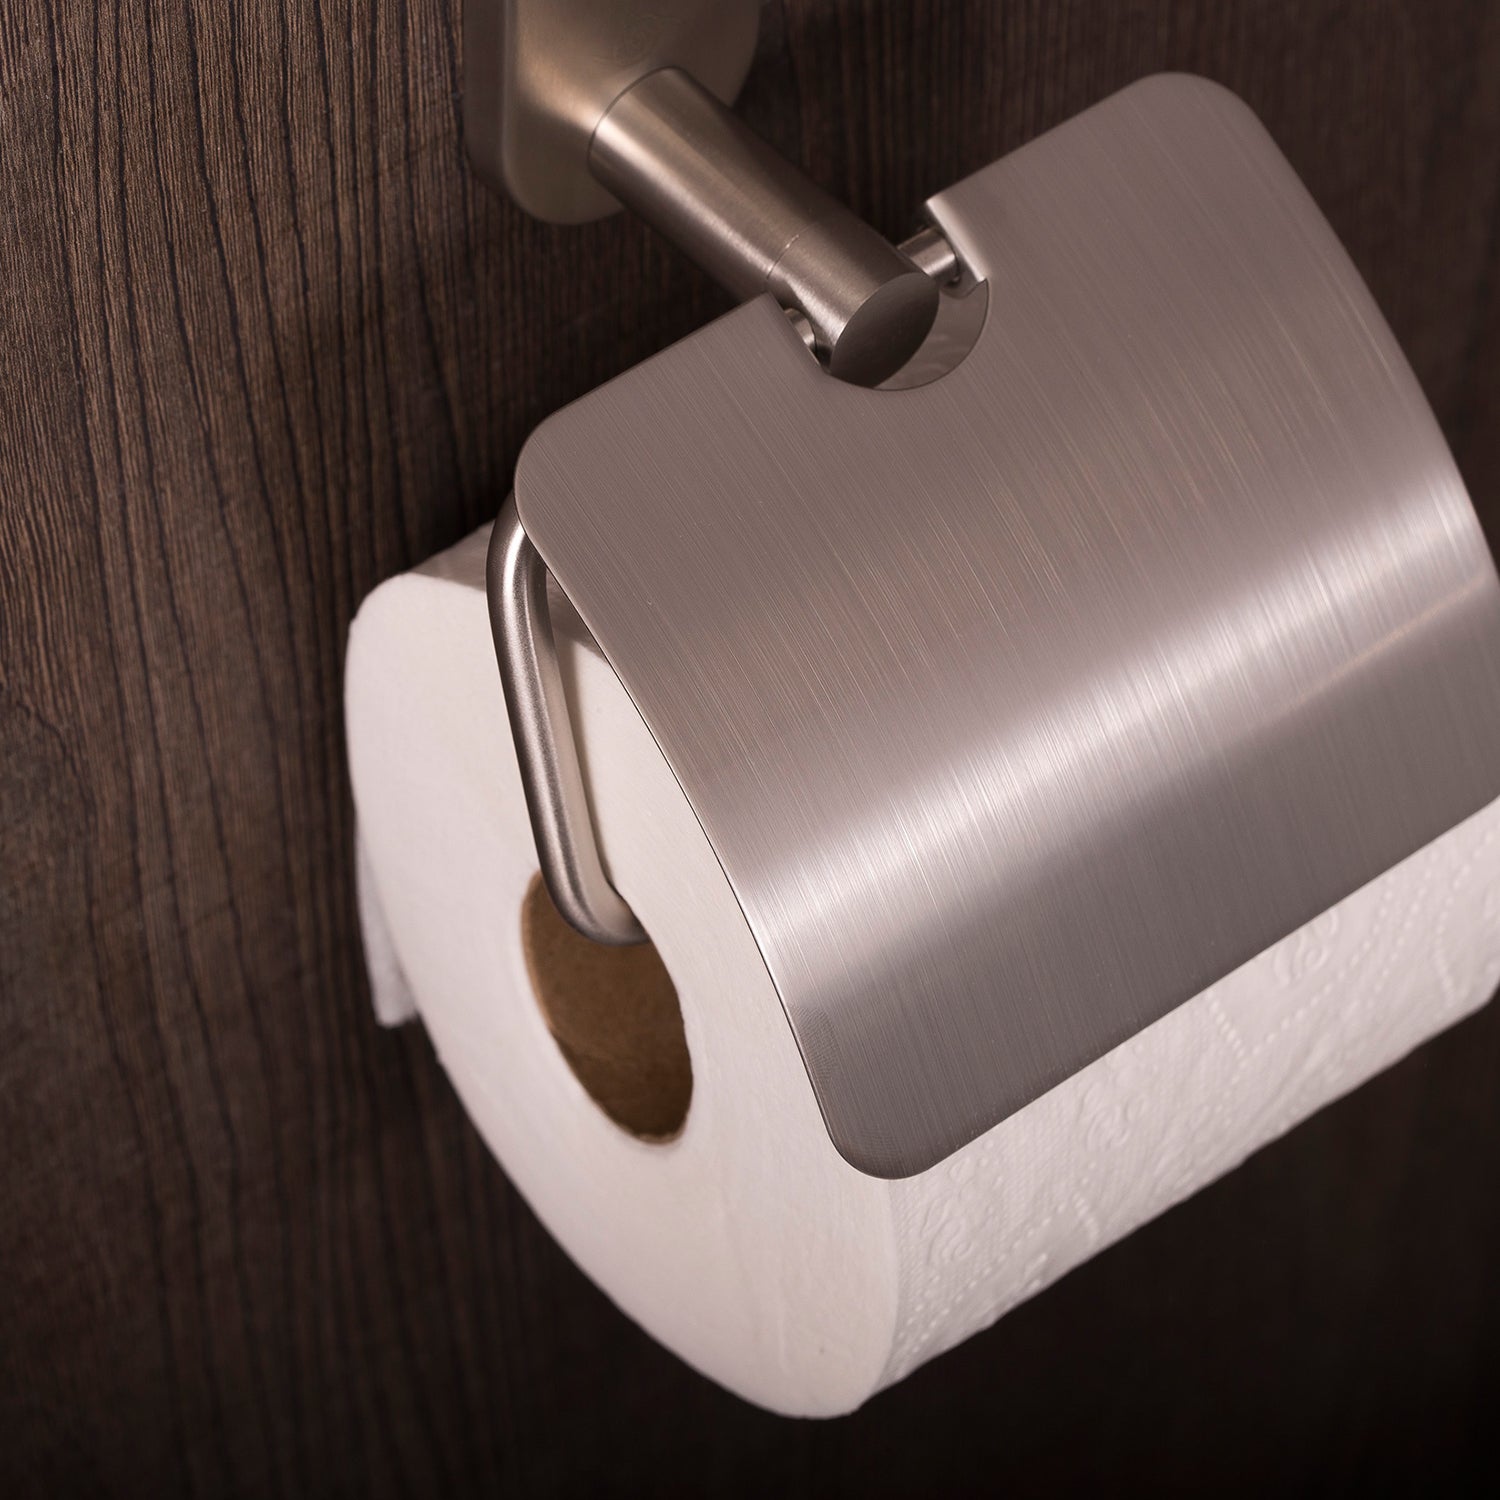 DAX Toilet Paper Holder with Cover, Right Opening, Wall Mount, Stainless Steel Body, Polish Finish, 5-1/2 x 7-5/16 x 2-3/8 Inches (DAX-G0207-P)